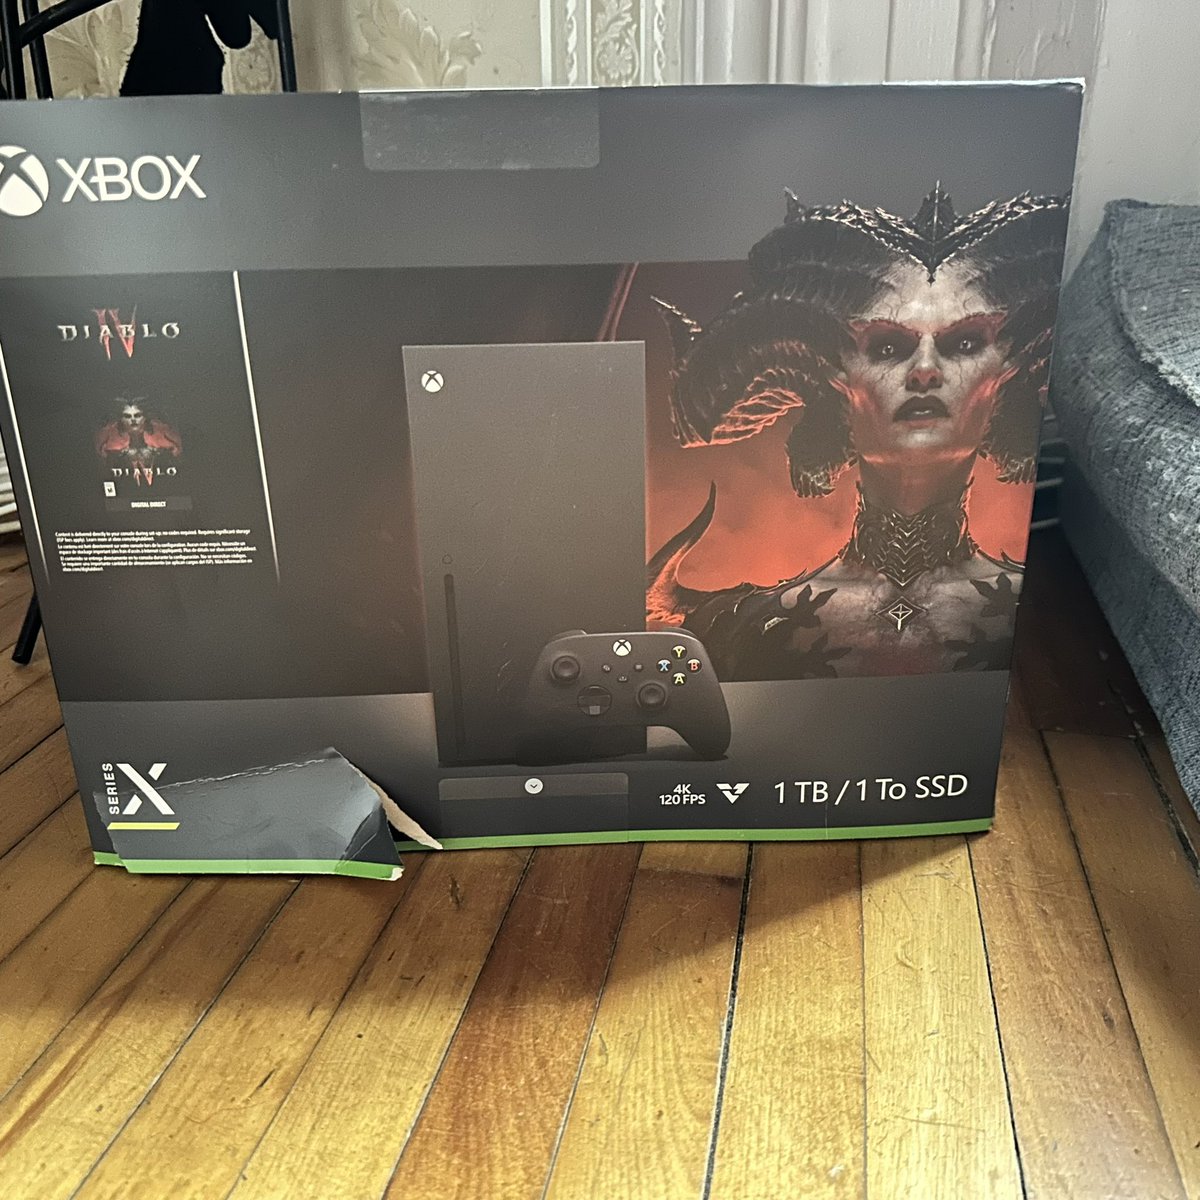 Still sick but finally got a new Xbox! 

Super pumped and I’ve been playing Diablo and actually “relaxing” to help get better lol

#gamergirl #xboxgamer #gamer